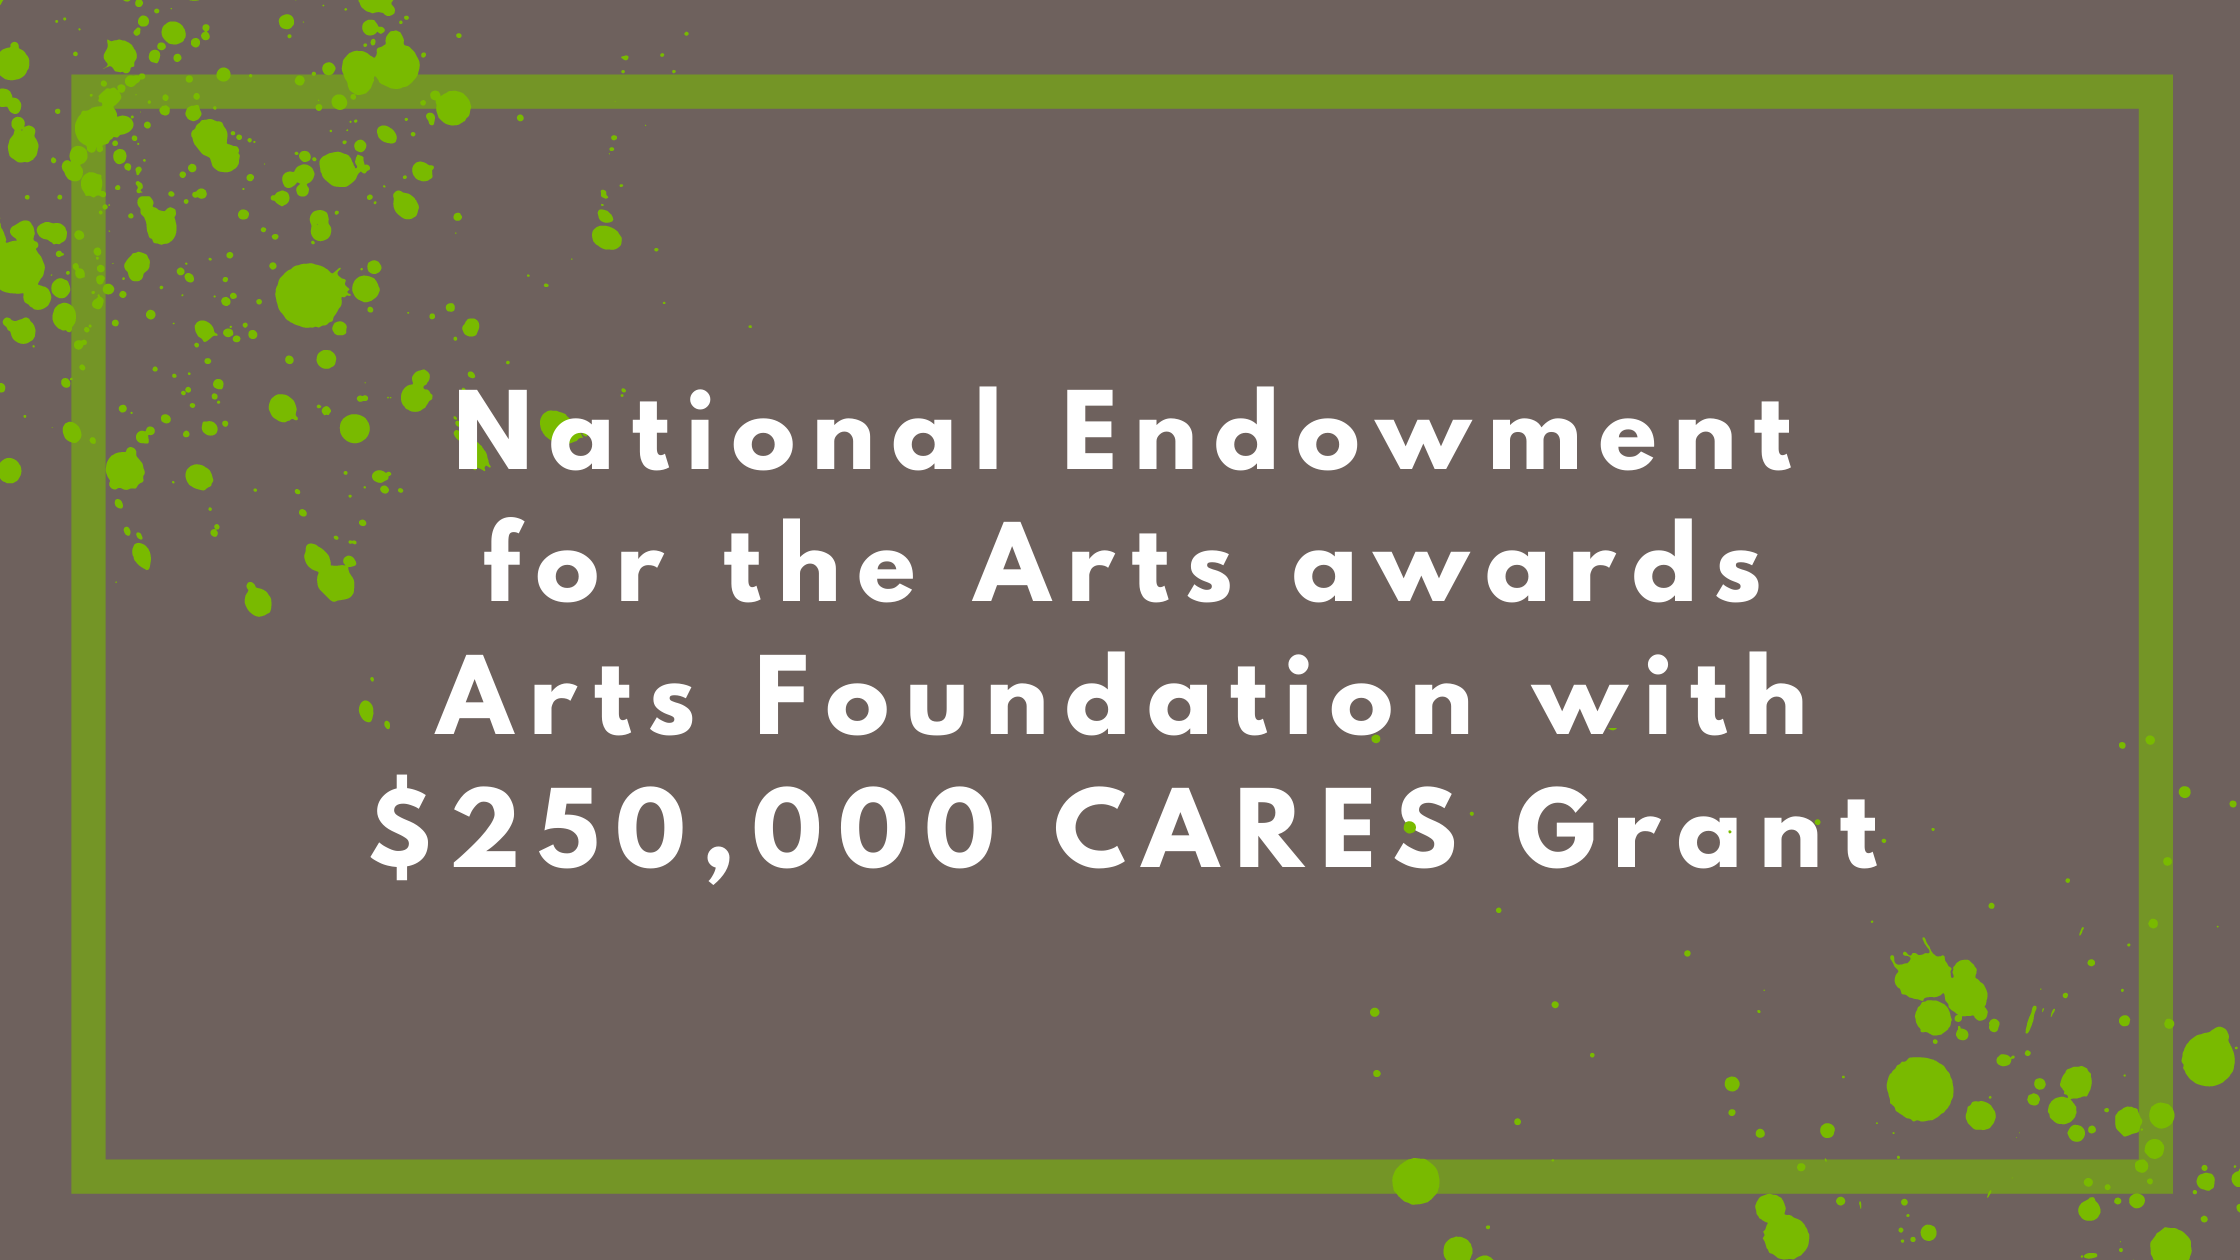 NEA awards the Arts Foundation with $250,000 CARES Grant